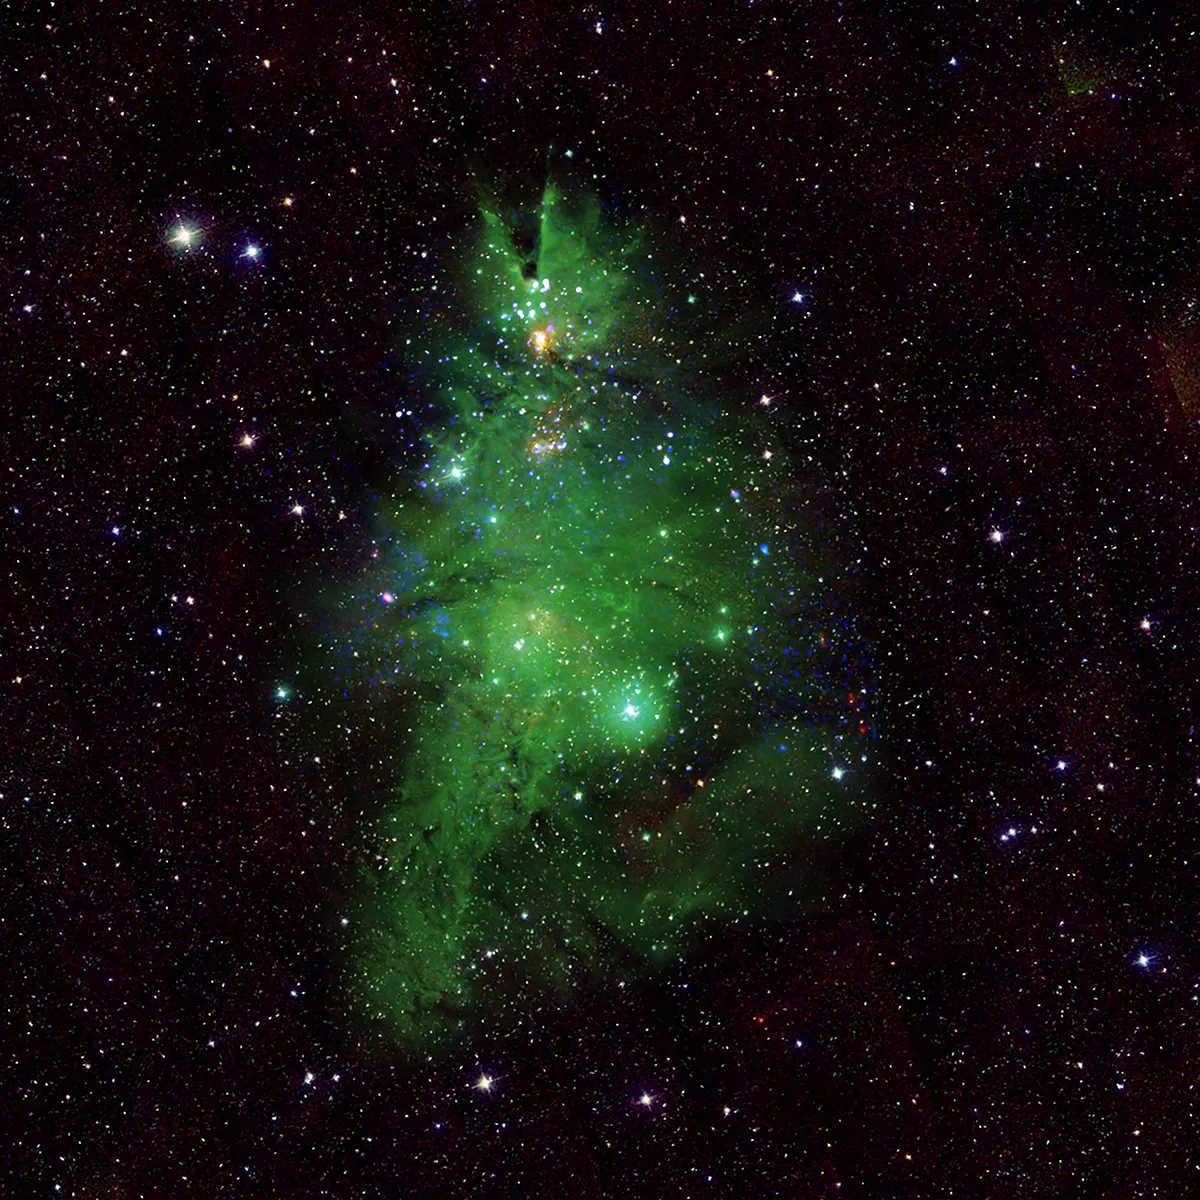 An image of the Christmas Tree Cluster processed to make it look more like a Christmas Tree. Blue and white 'lights' are young stars that give off X-rays detected by NASA’s Chandra X-ray Observatory. Green gas from the nebula is captured in optical light by the National Science Foundation’s WIYN 0.9-meter telescope on Kitt Peak. Infrared data from the Two Micron All Sky Survey shows foreground and background stars in white. Credit: X-ray: NASA/CXC/SAO; Optical: T.A. Rector (NRAO/AUI/NSF and NOIRLab/NSF/AURA) and B.A. Wolpa (NOIRLab/NSF/AURA); Infrared: NASA/NSF/IPAC/CalTech/Univ. of Massachusetts; Image Processing: NASA/CXC/SAO/L. Frattare & J.Major